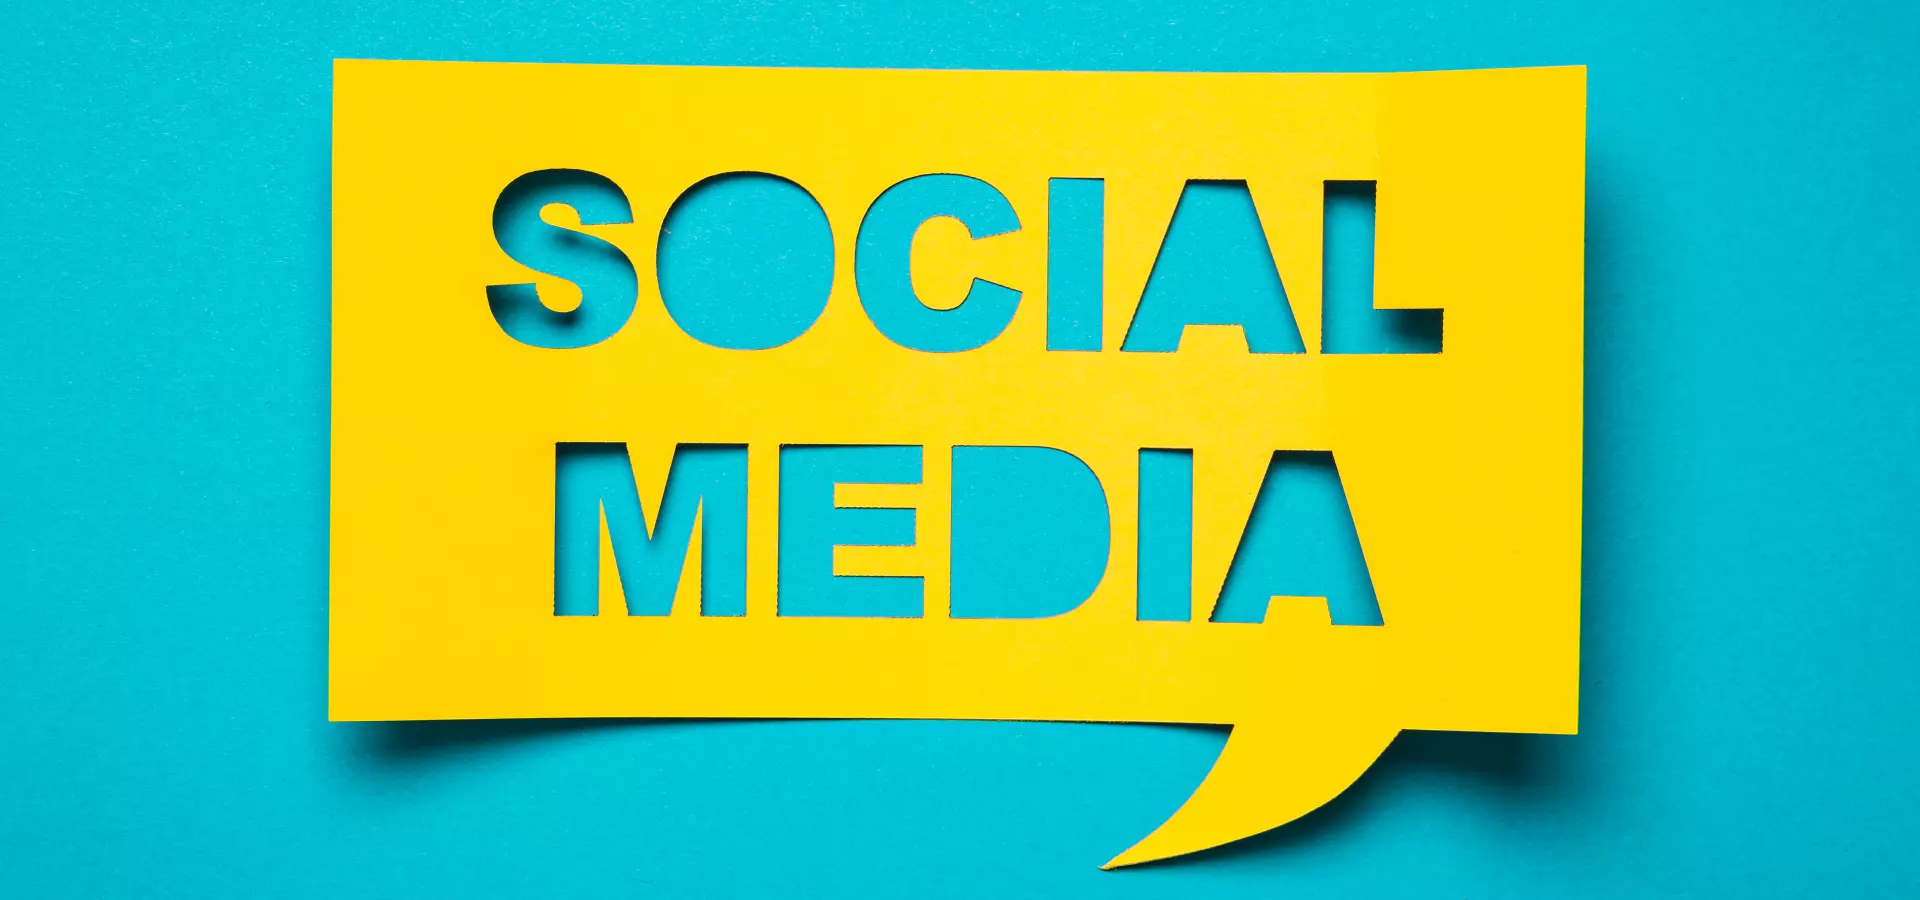 Cut-out yellow sign with the words 'social media' on a blue background.